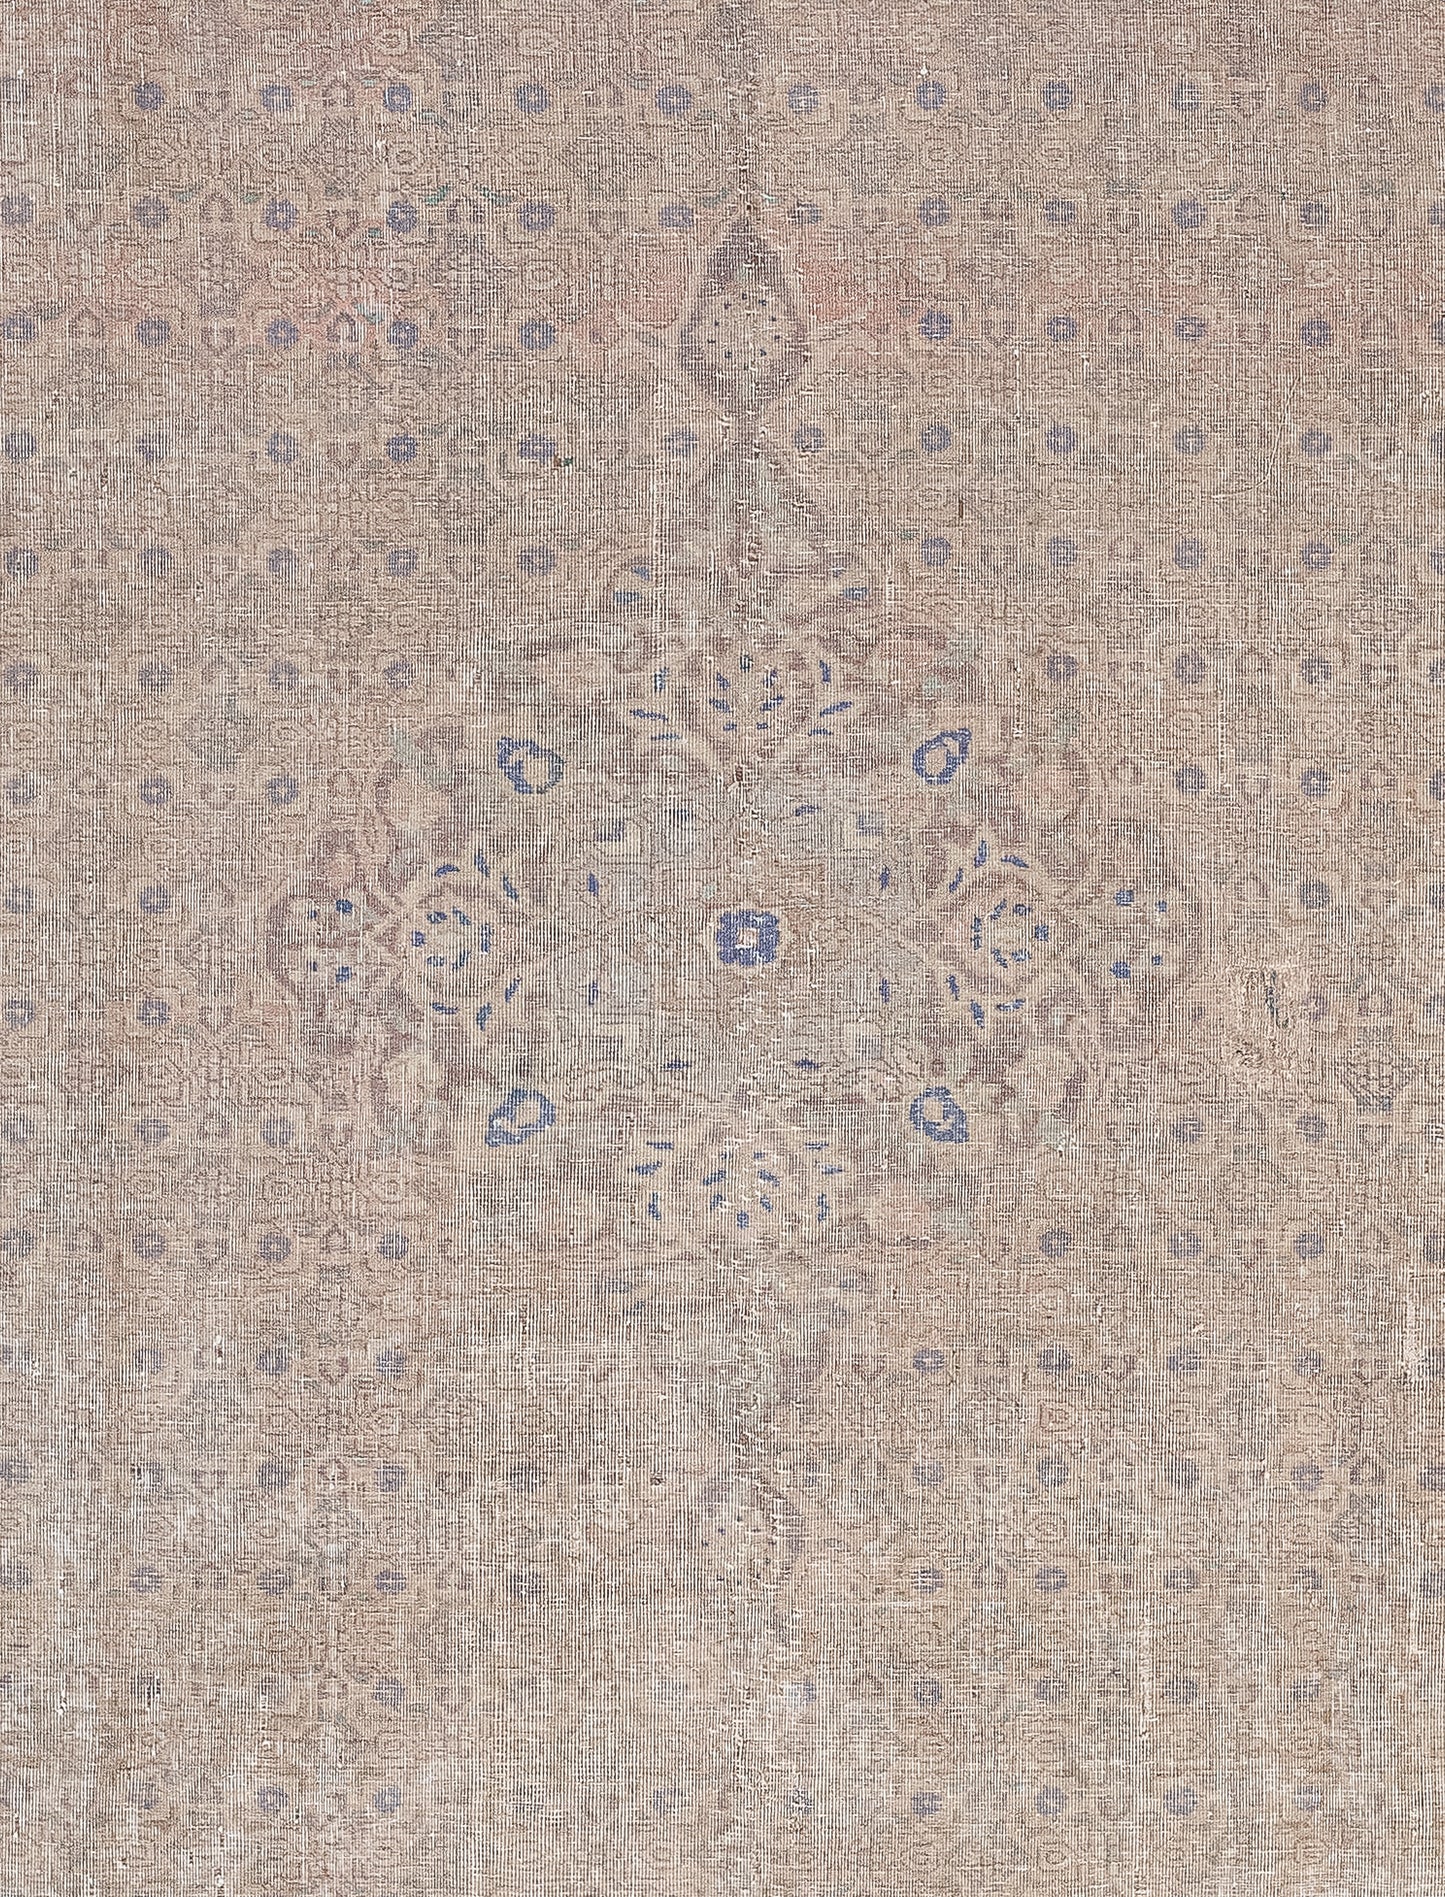 The center of the rug features a fascinating diamond formed by symmetrical organic lines.